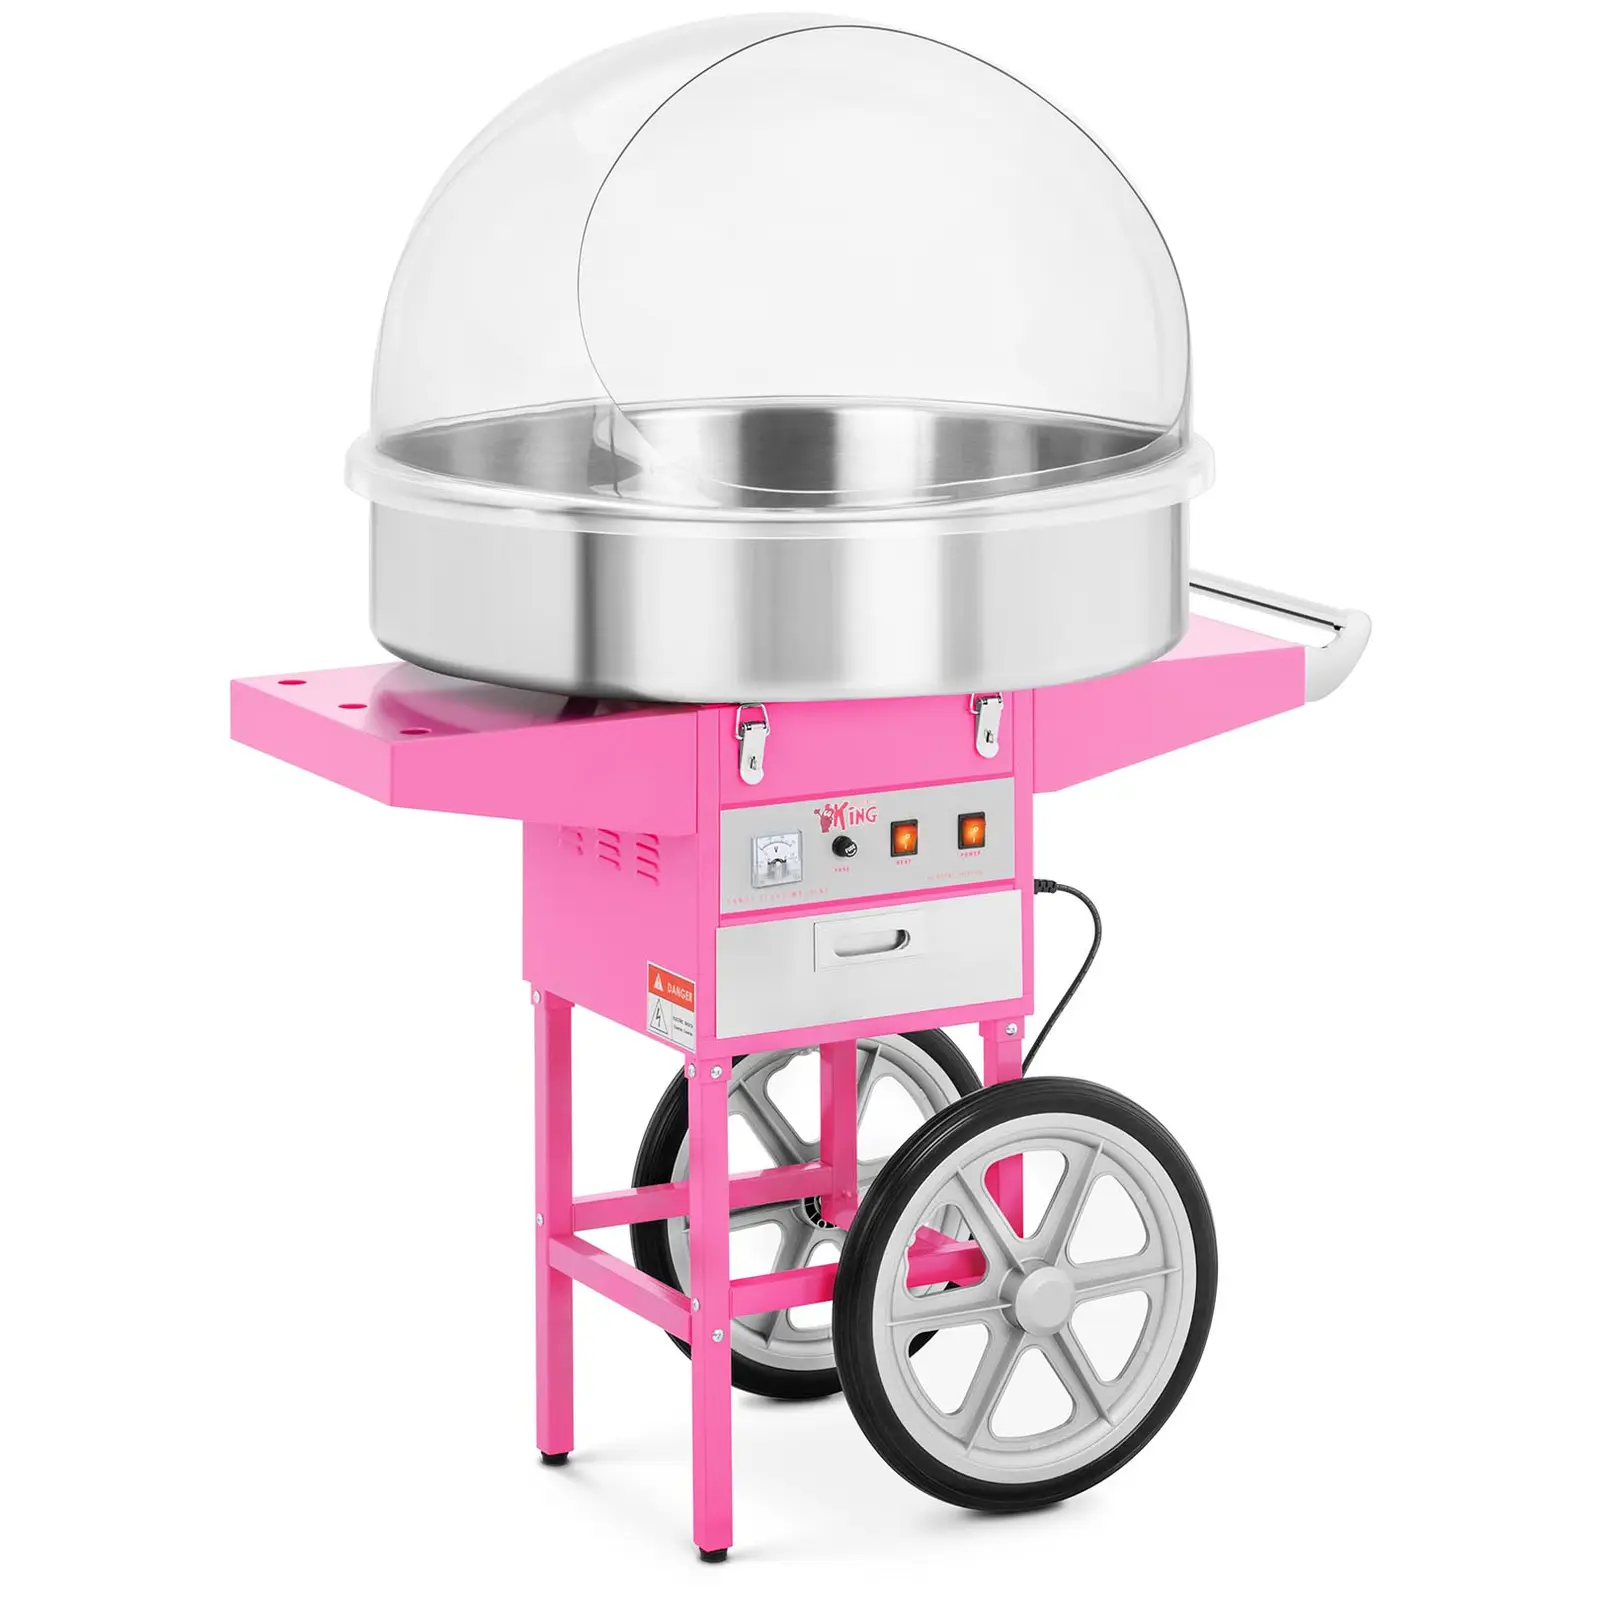 Commercial Candy Floss Machine - 72 cm - 1200 W - Incl. Wagon